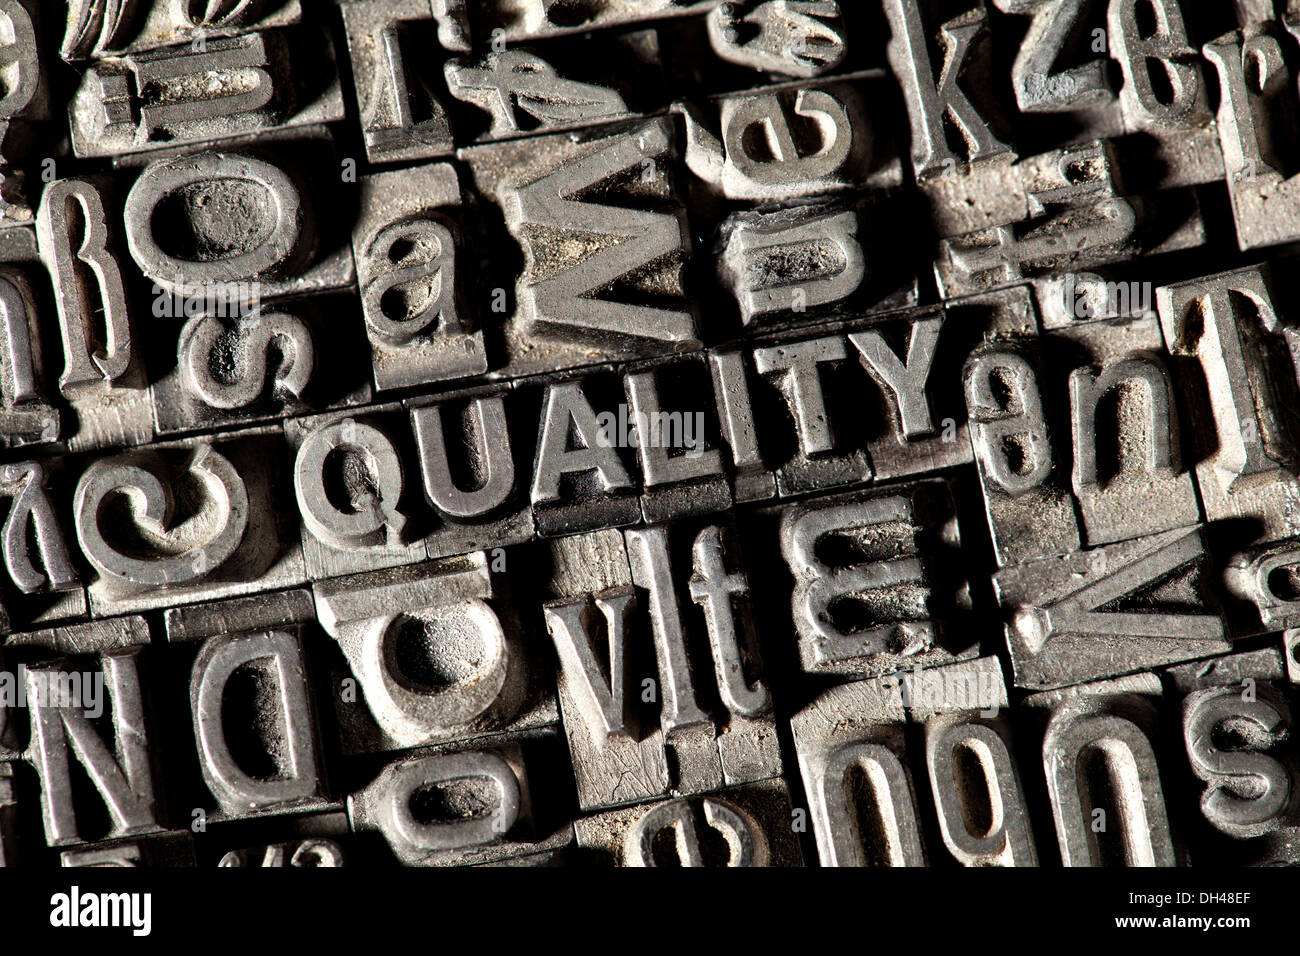 Old lead letters forming the word 'QUALITY' Stock Photo